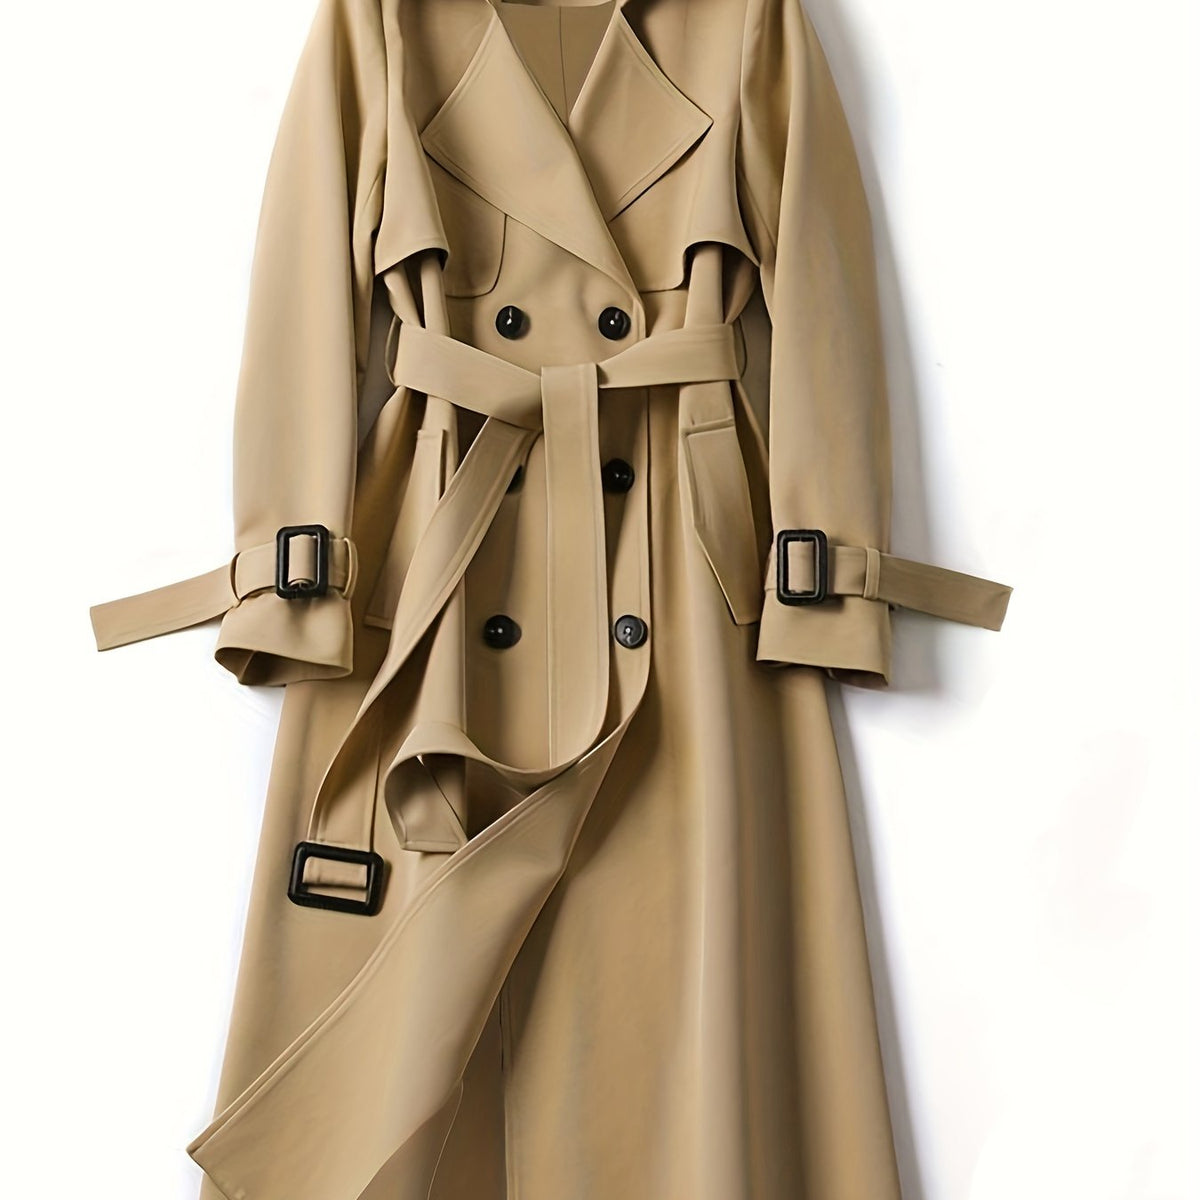 dunnmall  Double Breasted Trench Coat, Casual Lapel Long Sleeve Outerwear, Women's Clothing